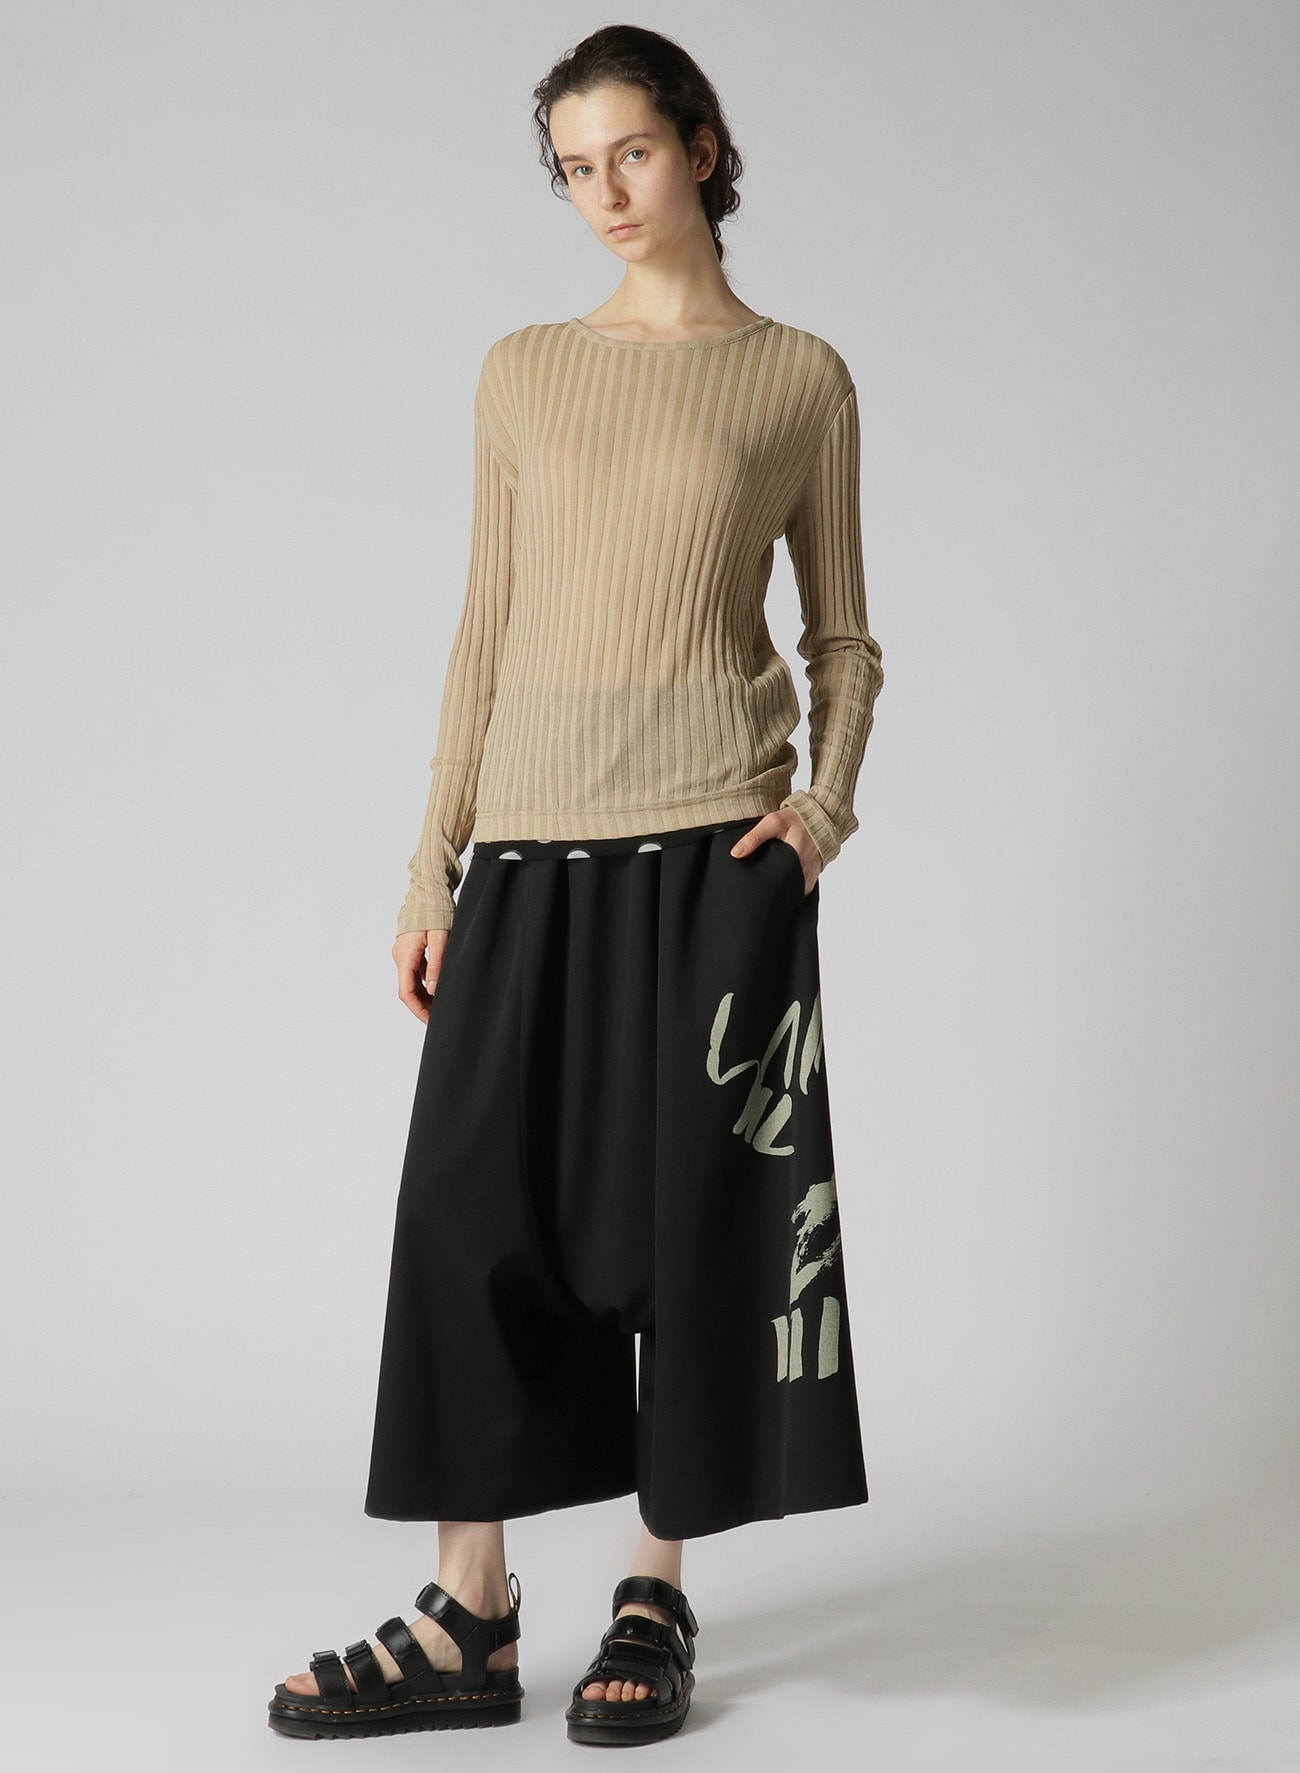 HARD TWISTED RIB ROUND NECK LONG SLEEVE T(S Beige): Y's｜THE SHOP 